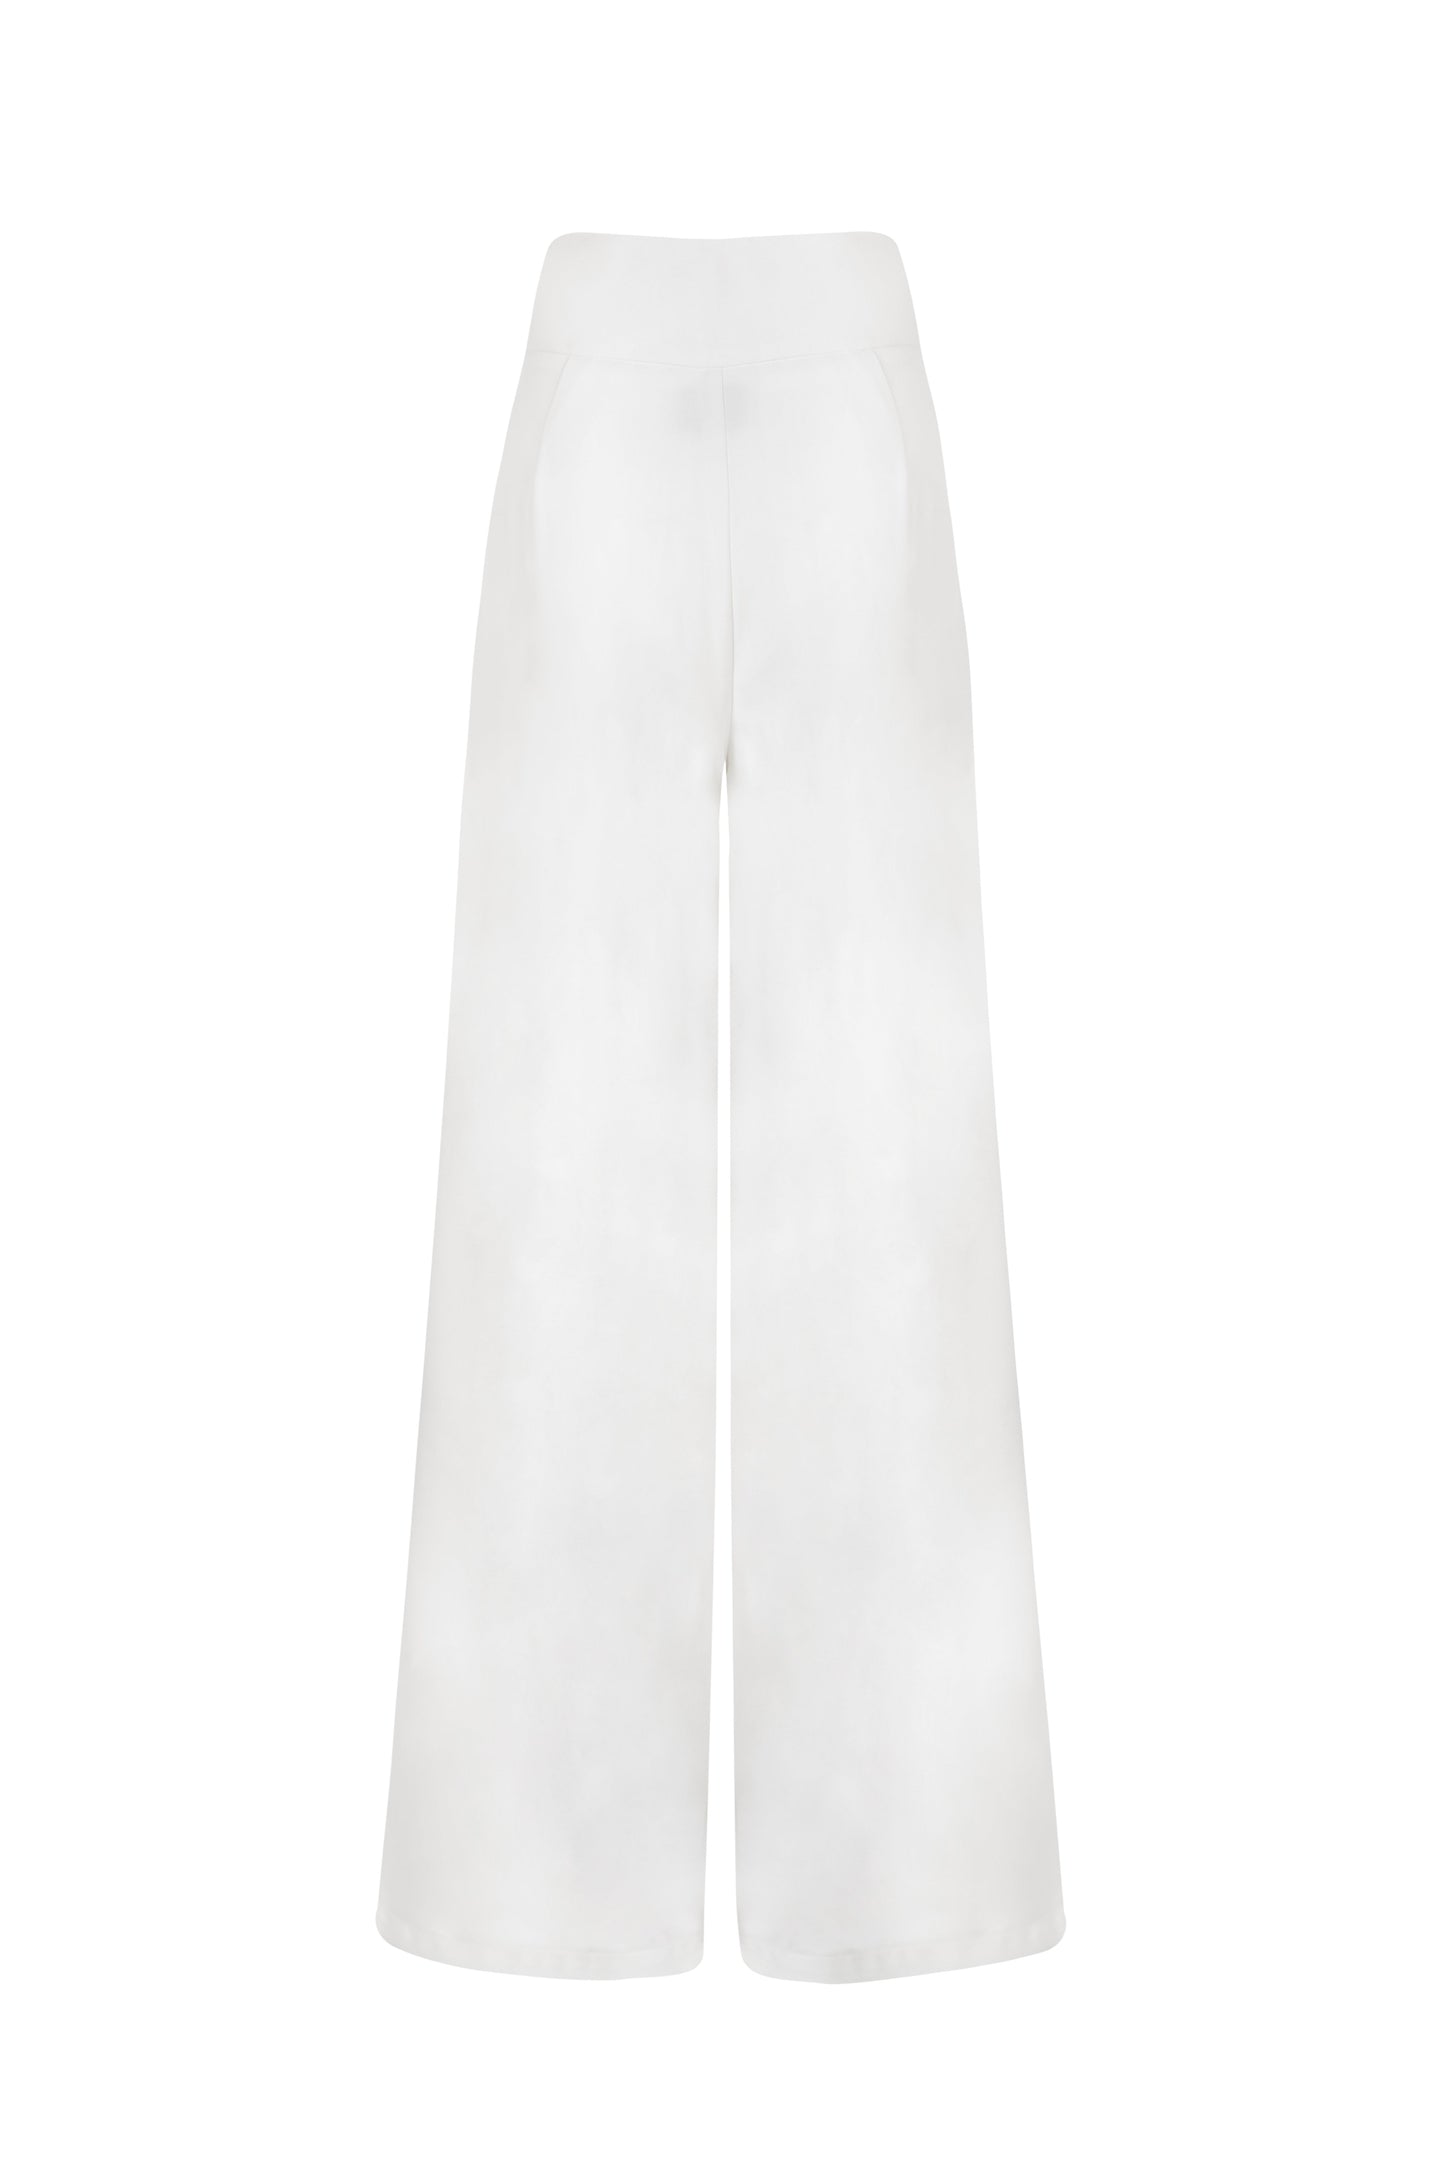 'DALINAS' WOOL BLEND WIDE LEG TROUSERS - OFF WHITE